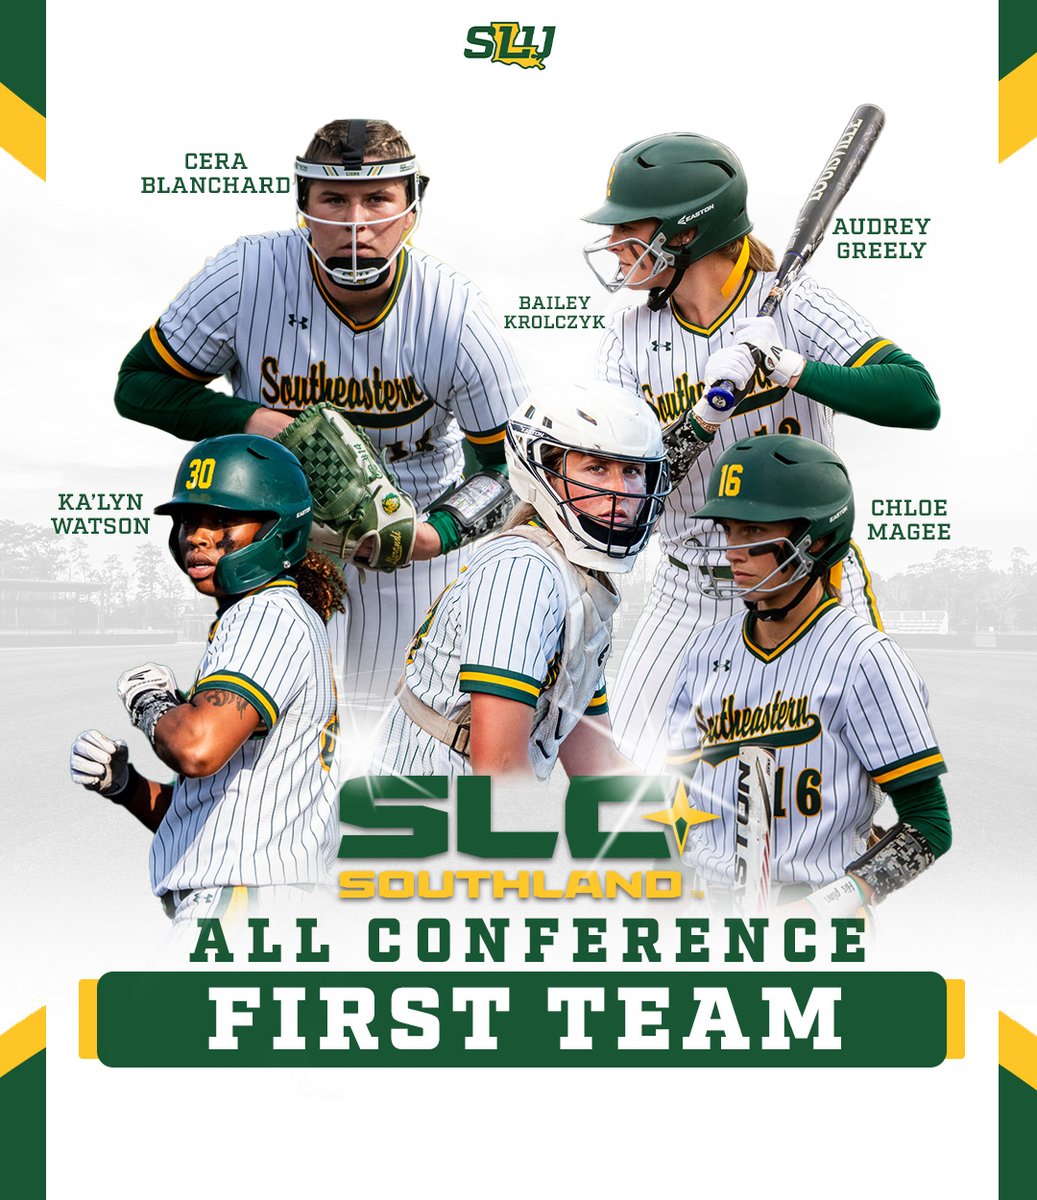 Congrats to our school-record five first team All-SLC selections | The group includes the first-ever @LionUpSoftball freshman to earn first team All-SLC, two of the three SLU players to earn first team three times and the first All-SLC first team pitcher since 2007 #LionUp